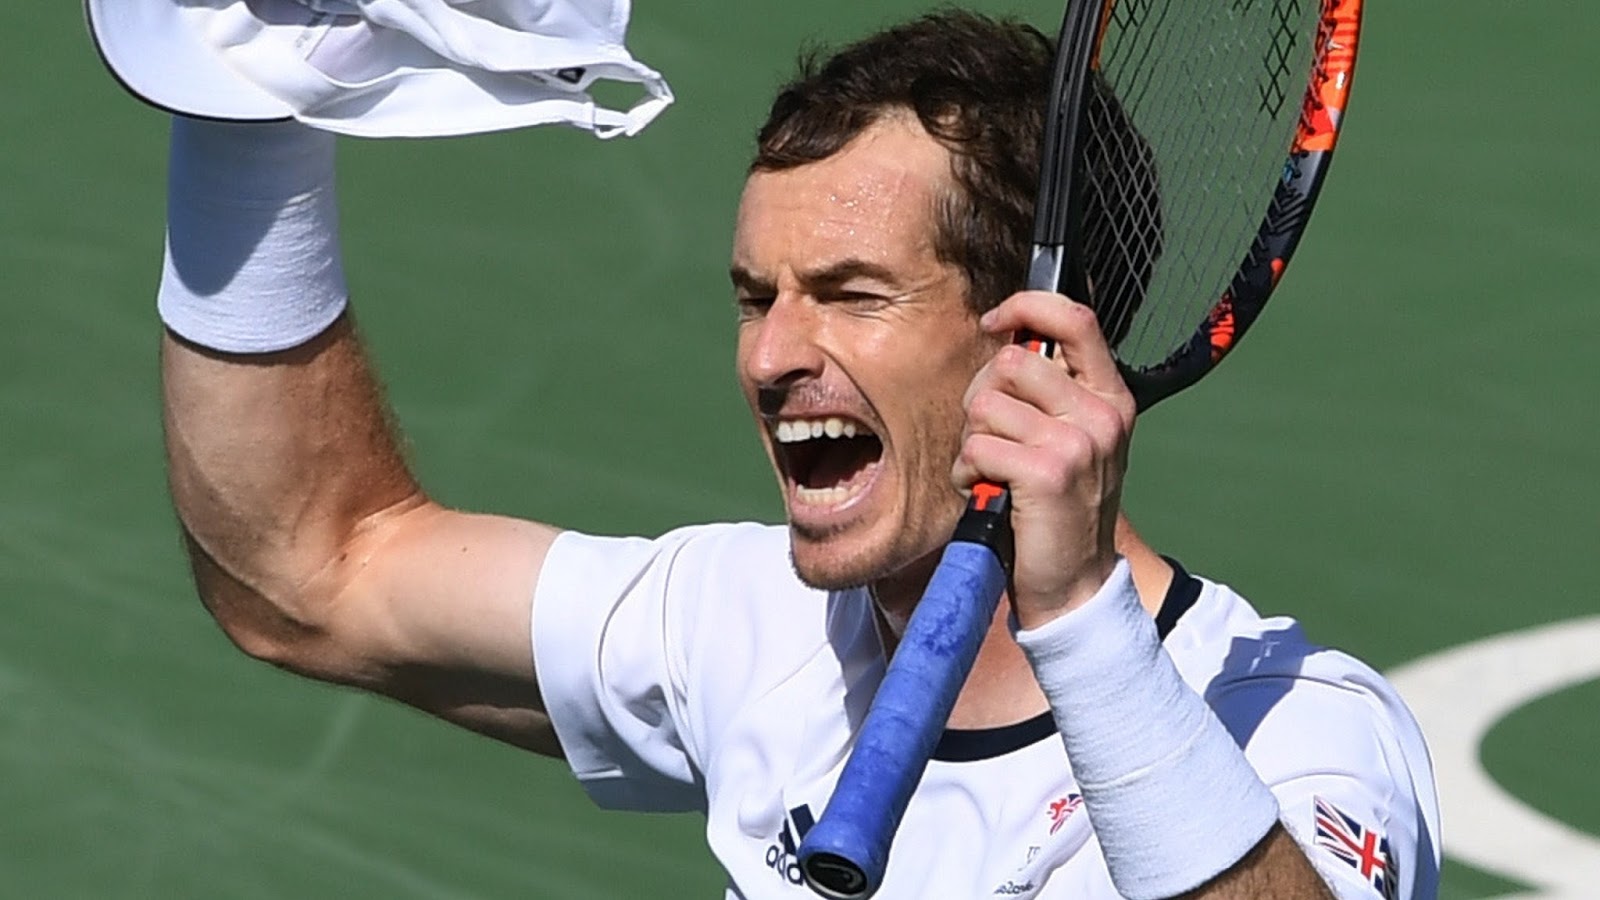 ANDY MURRAY 5